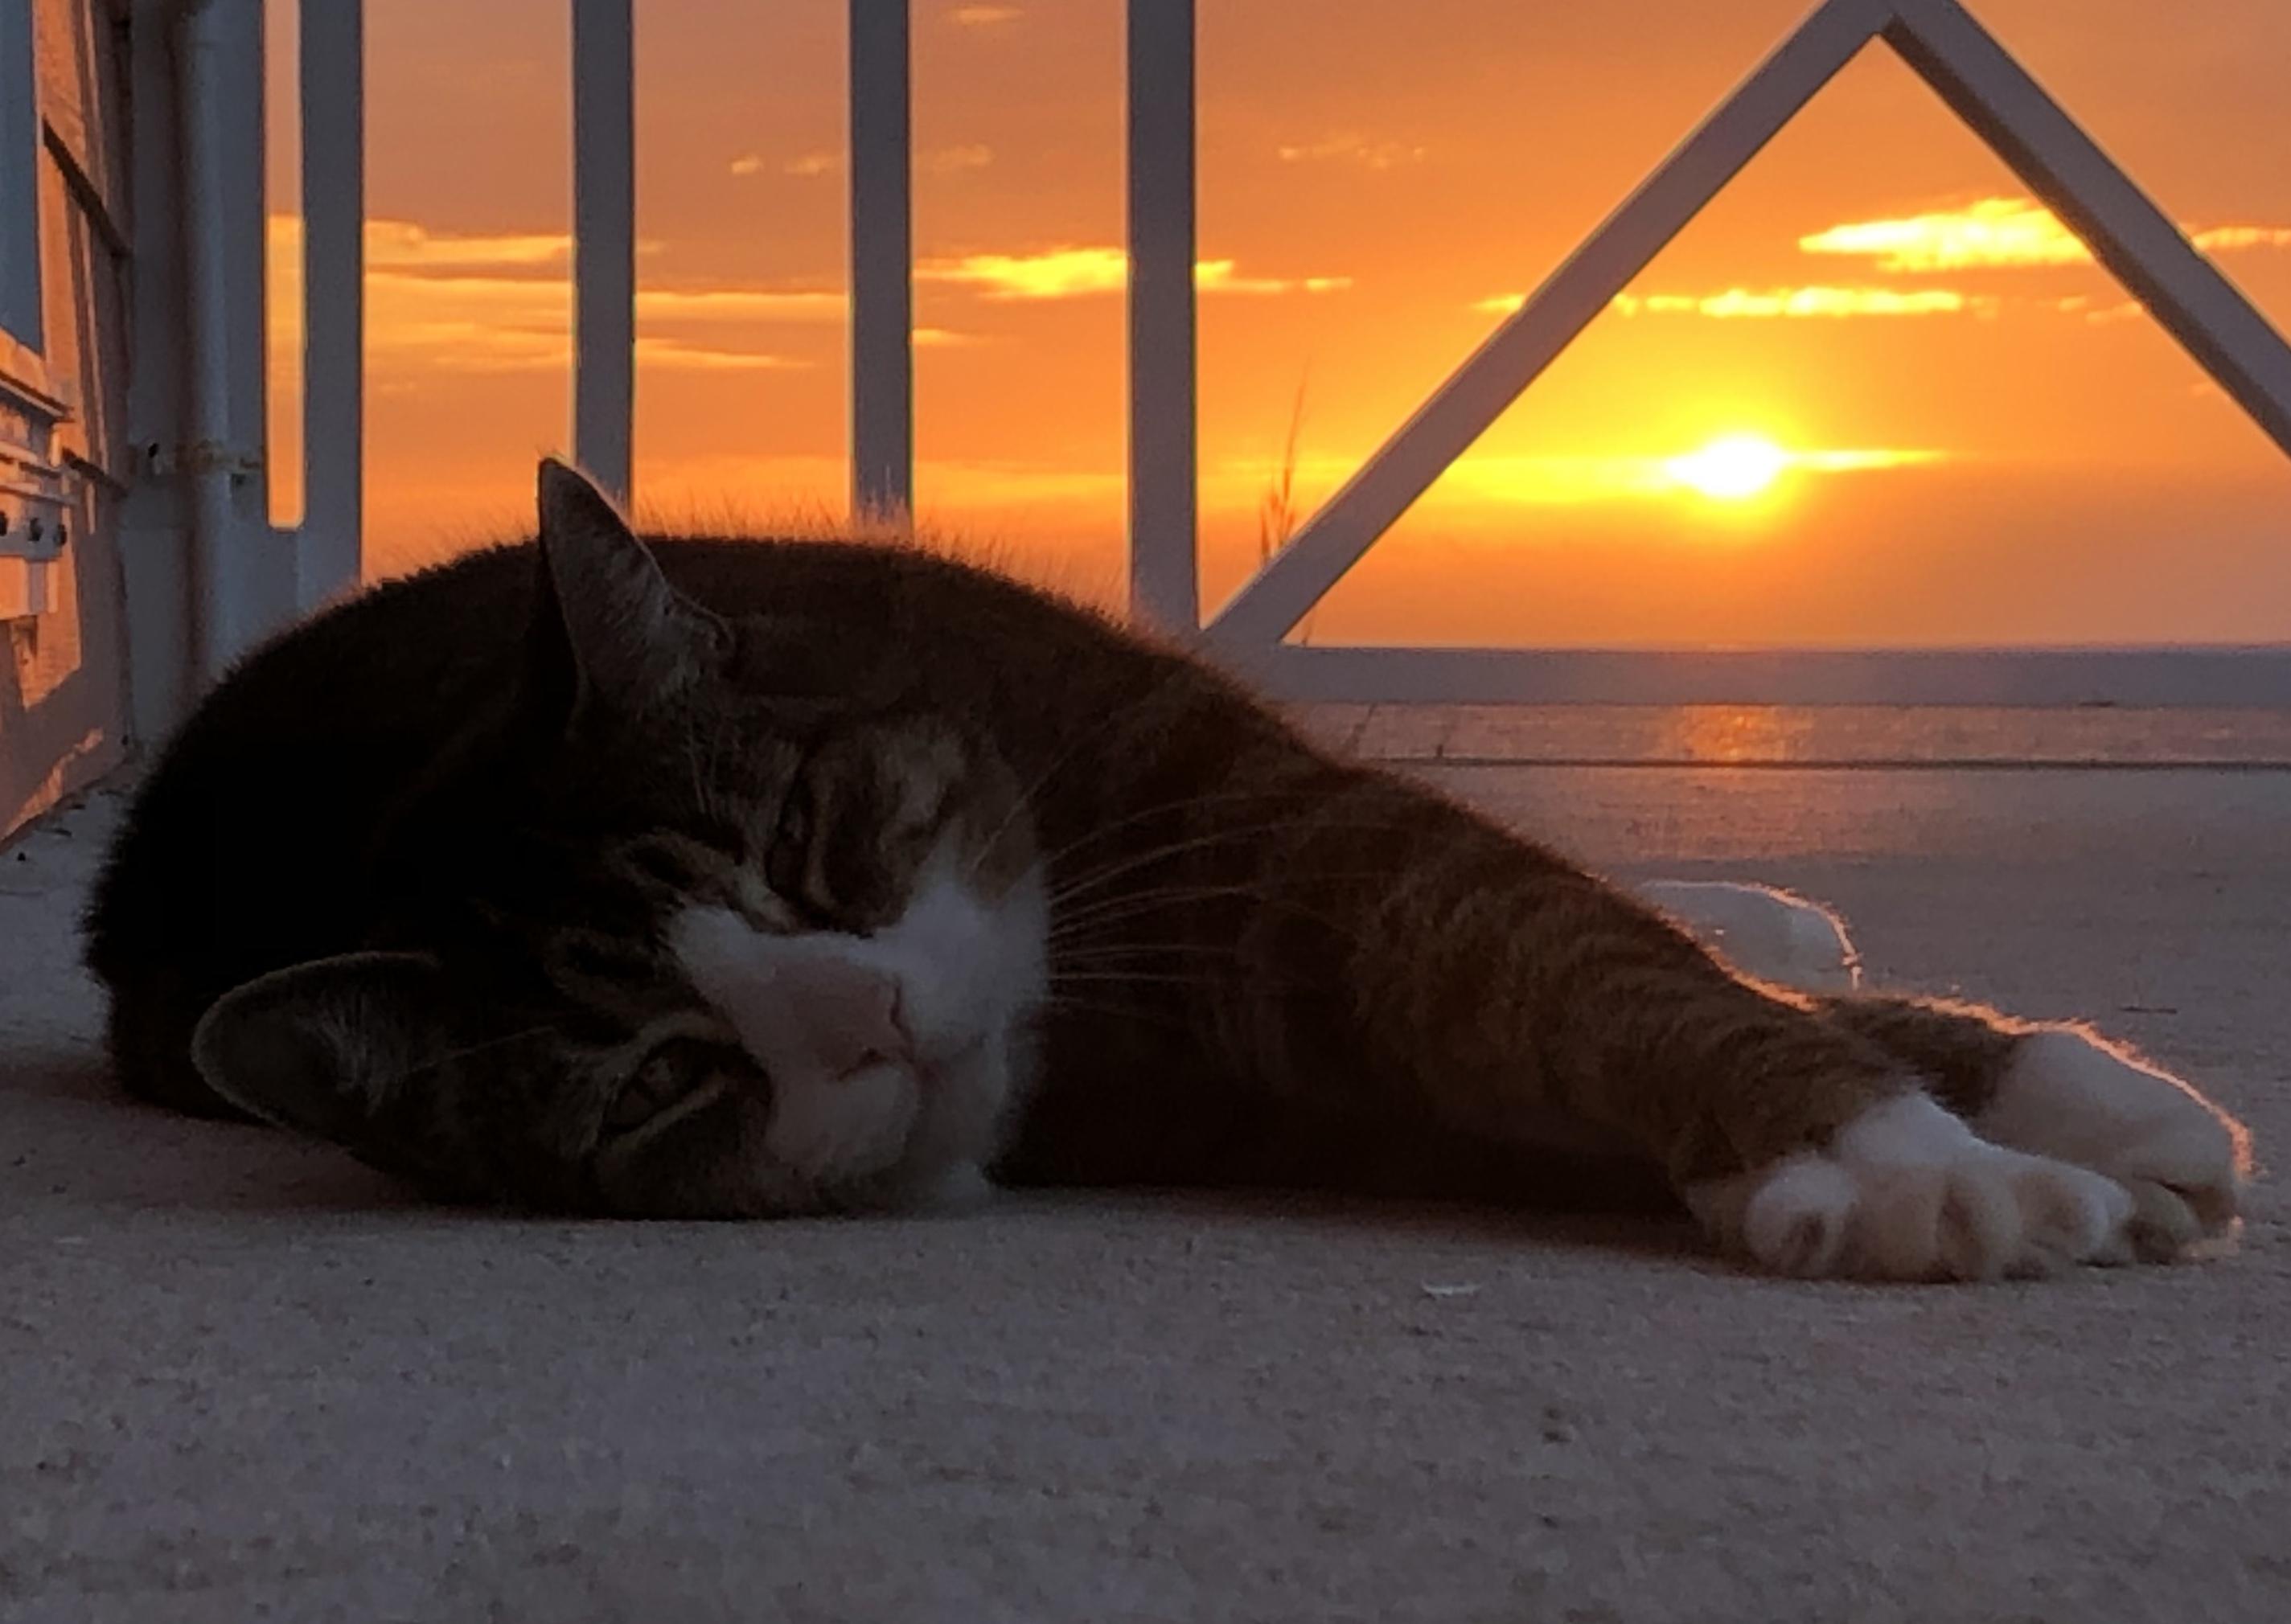 My cat loves to watch sunsets